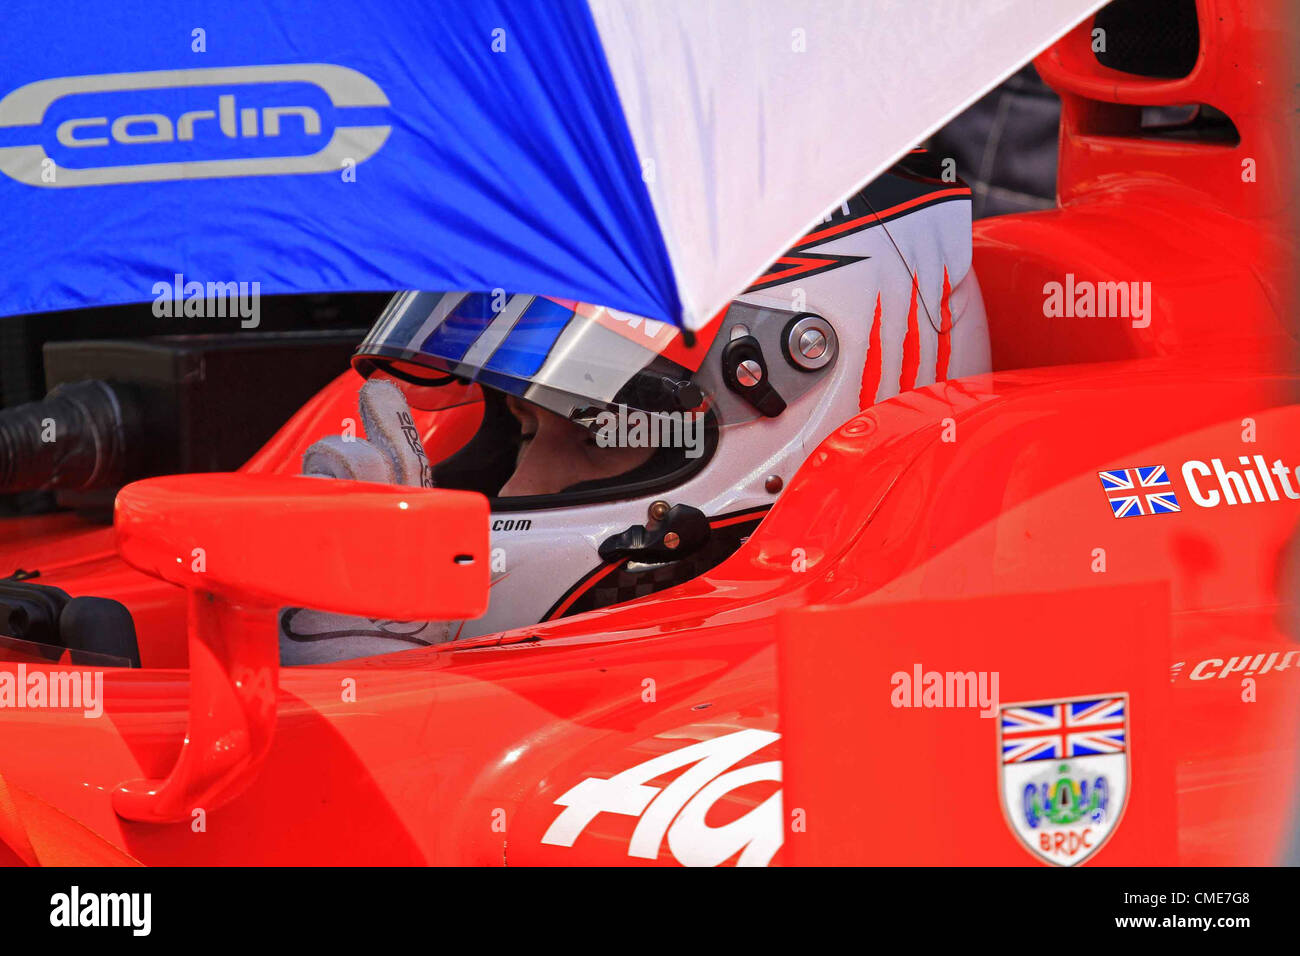 28.07.2012. Budapest, Hungary. FIA GP2  Motor racing.  Max Chilton on grid with eyes closed in concentration Stock Photo